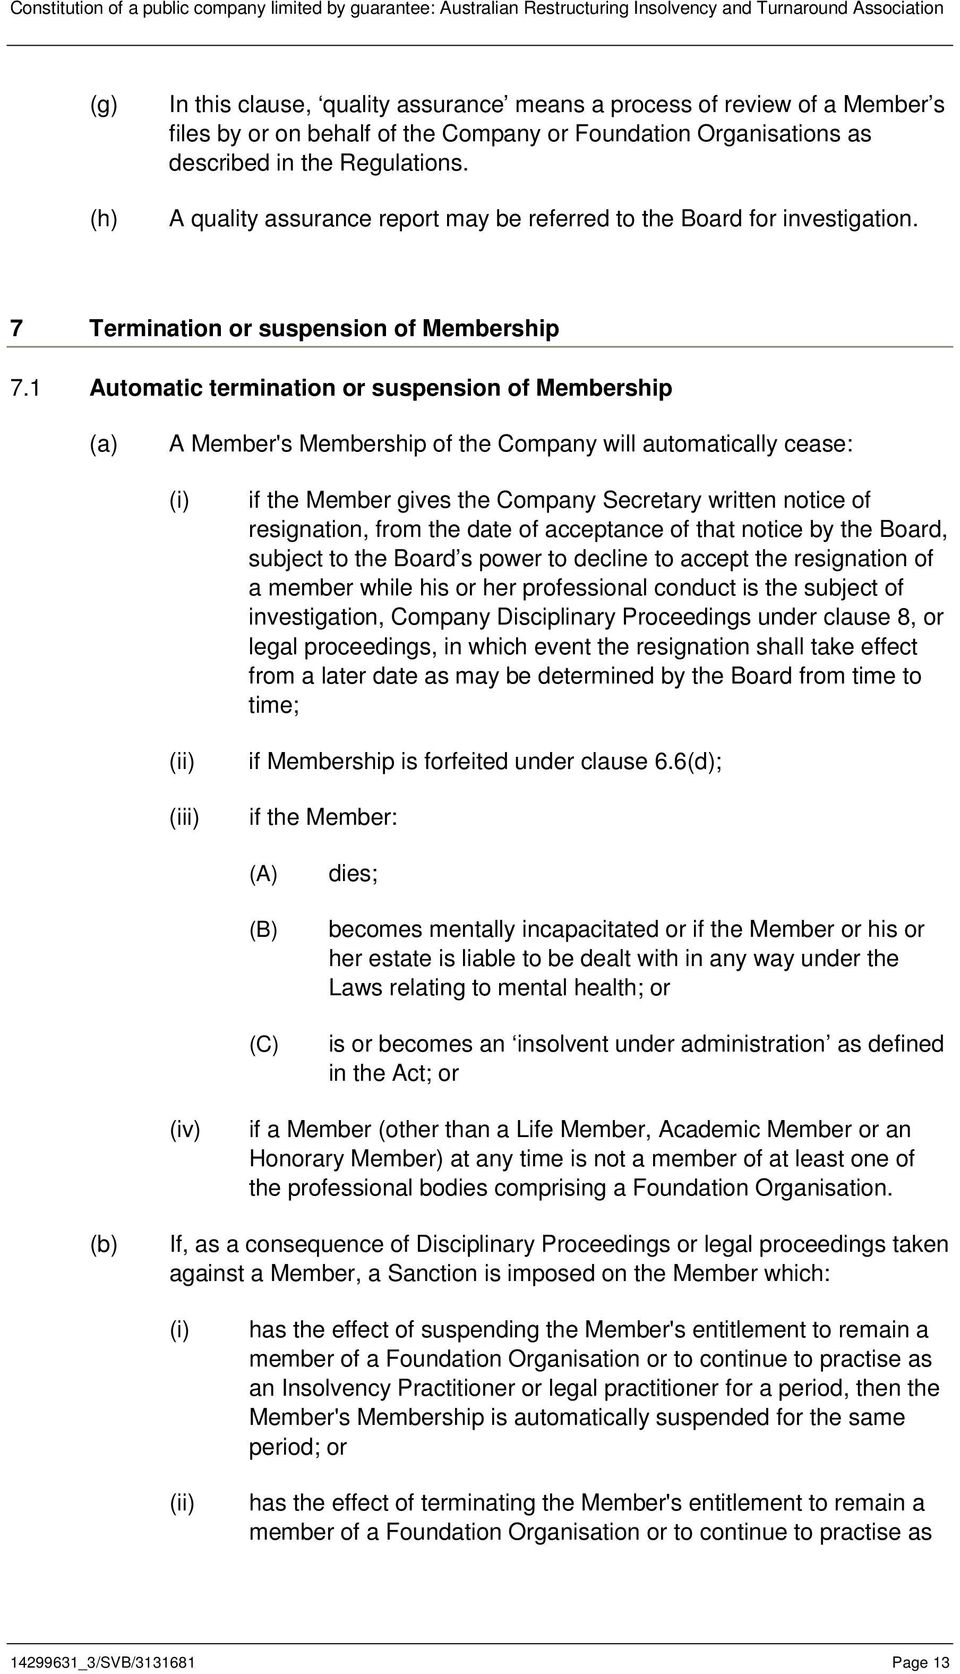 1 Automatic termination or suspension of Membership A Member's Membership of the Company will automatically cease: (iii) if the Member gives the Company Secretary written notice of resignation, from